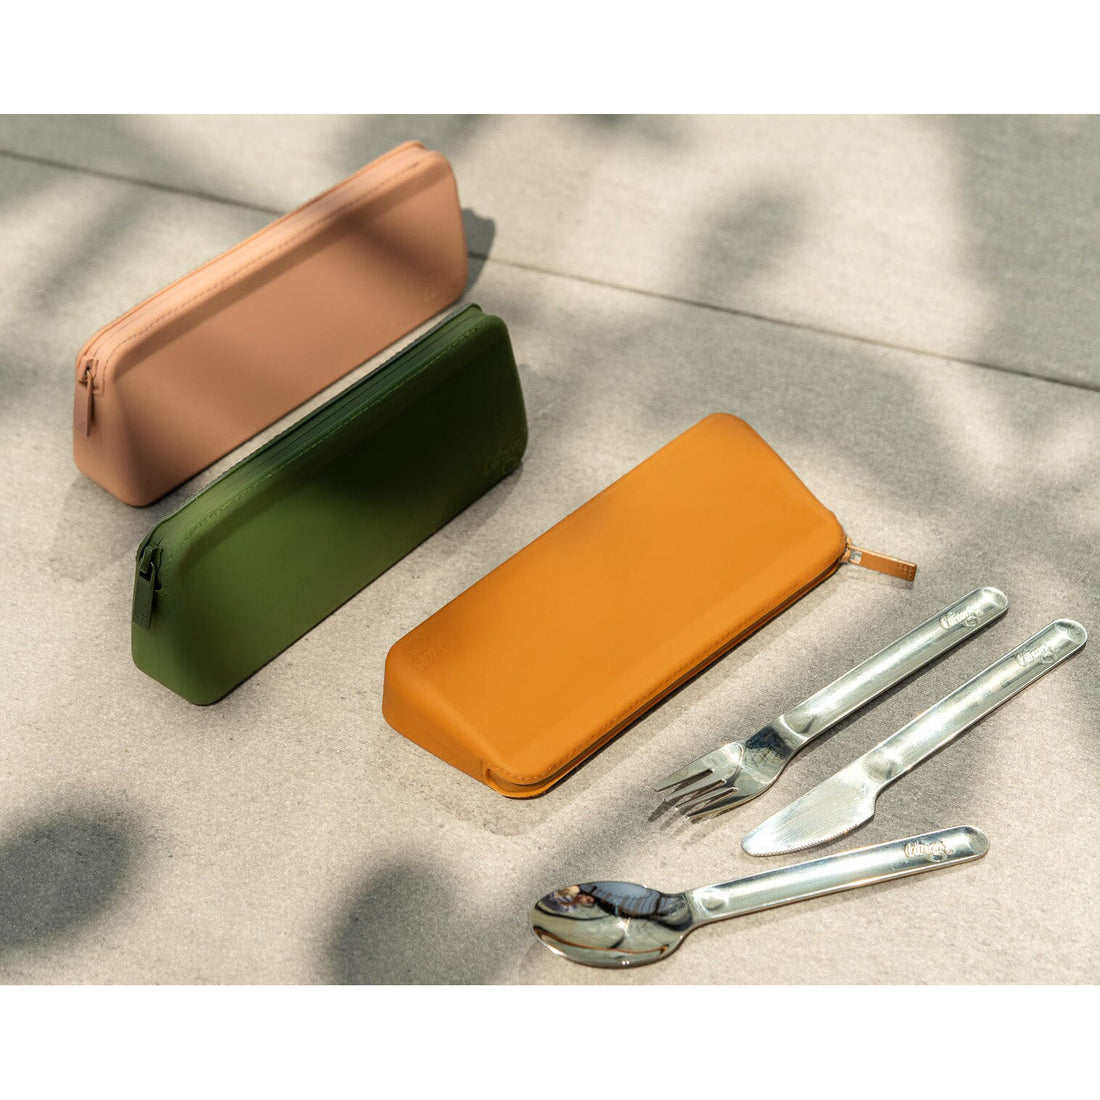 citron-stainless-steel-cutlery-with-pouch-blush-pink-citr-61091